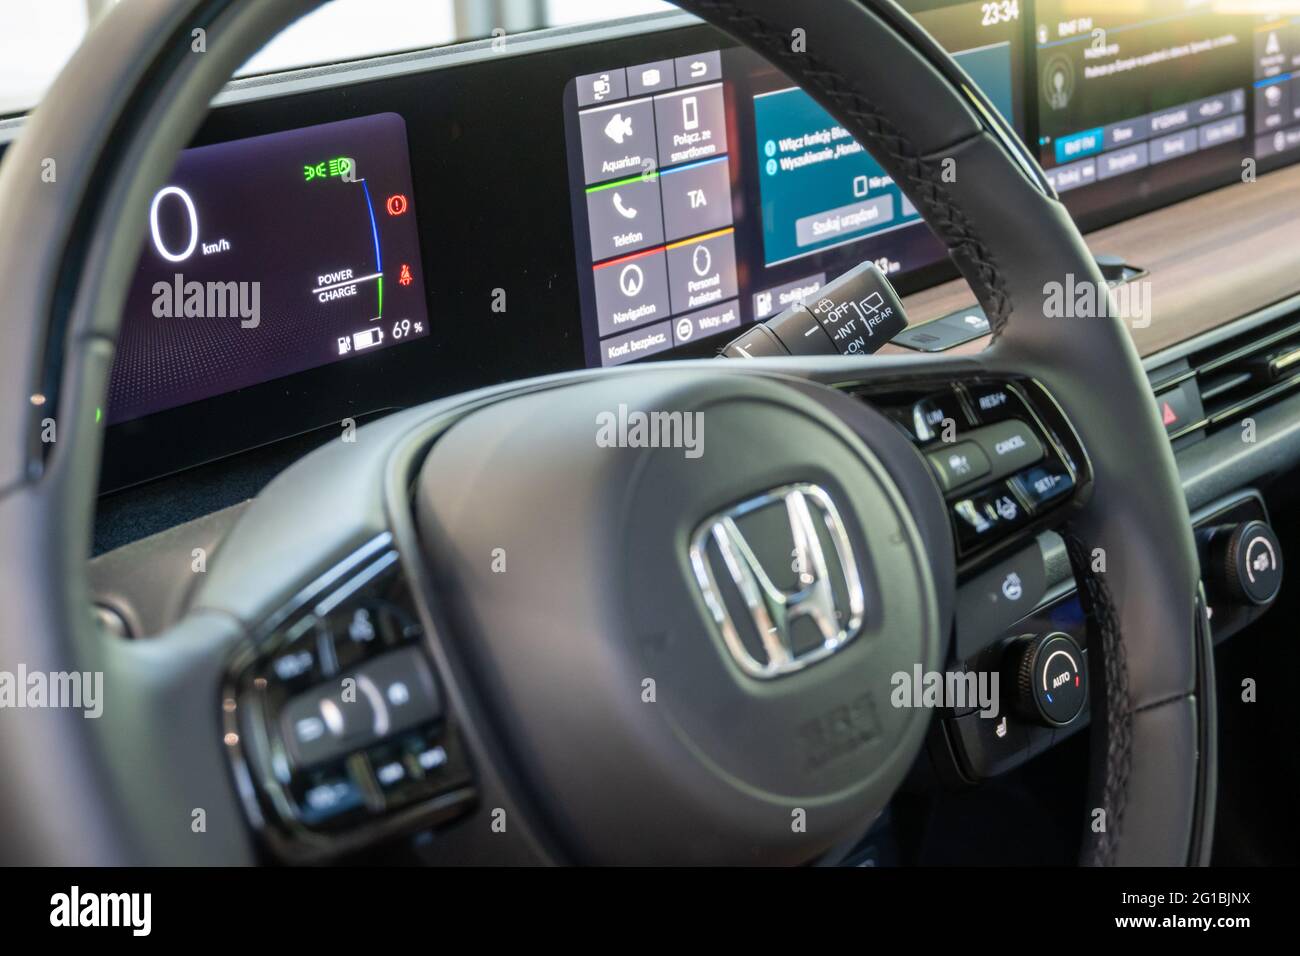 Gdansk, Poland - June 5, 2021: Honda E electric car dashboard display with  battery indicator showing a battery charge Stock Photo - Alamy